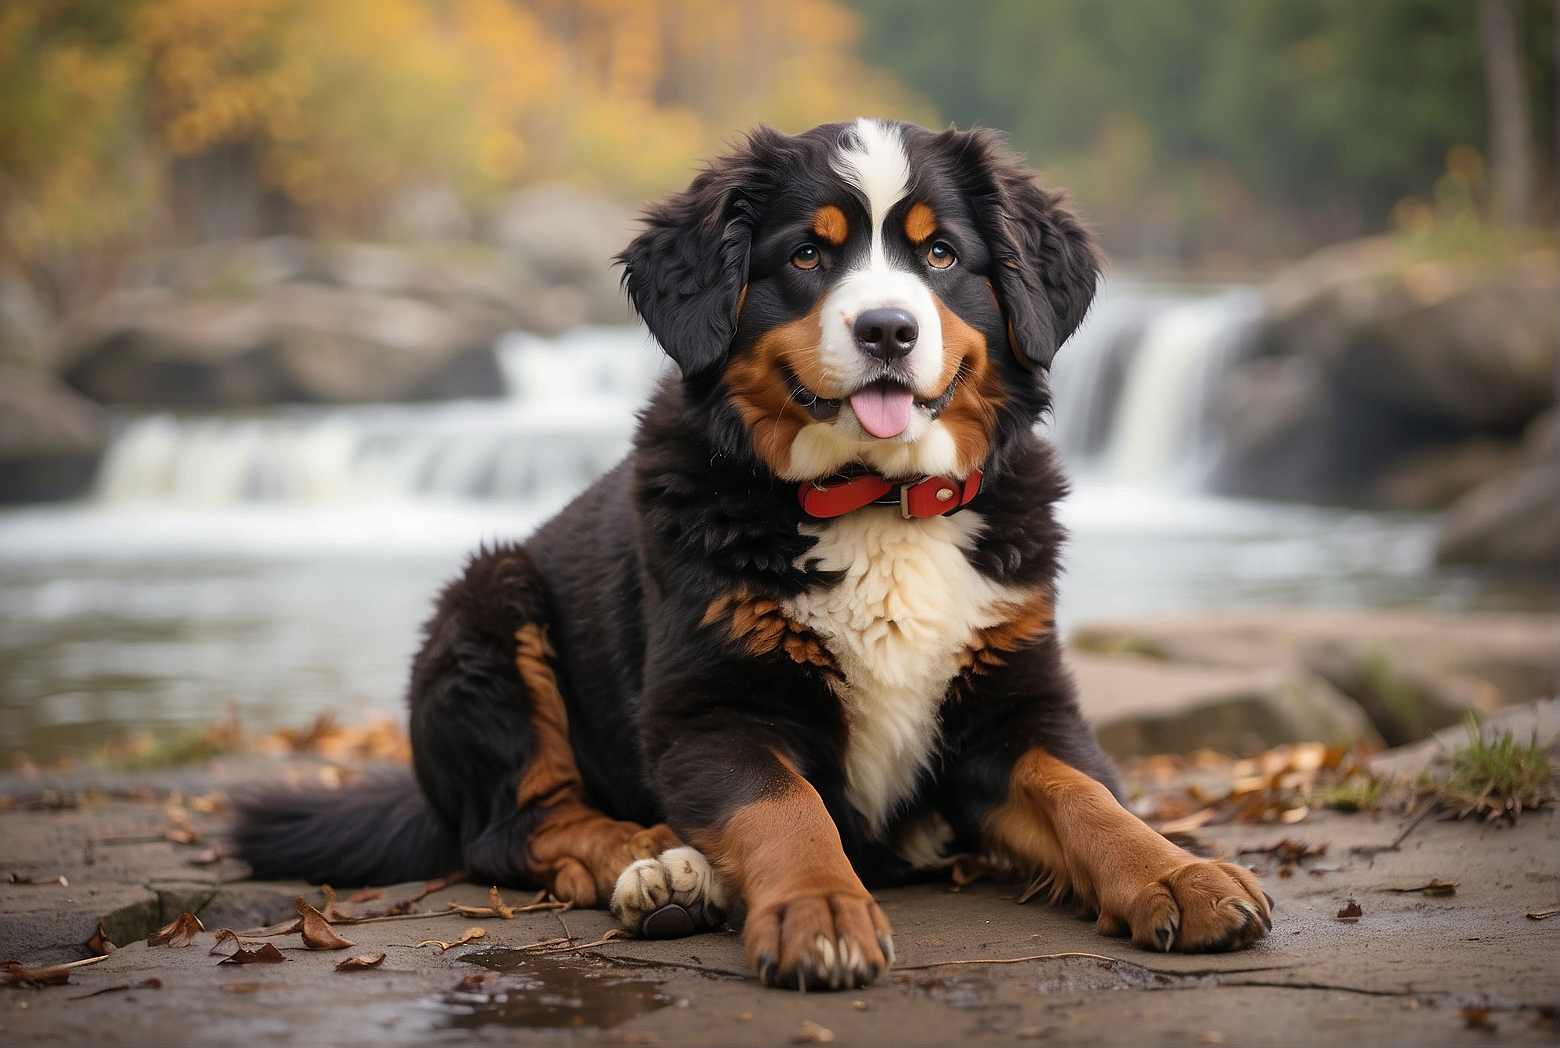 How to Properly Care for a Bernese Mountain Dog